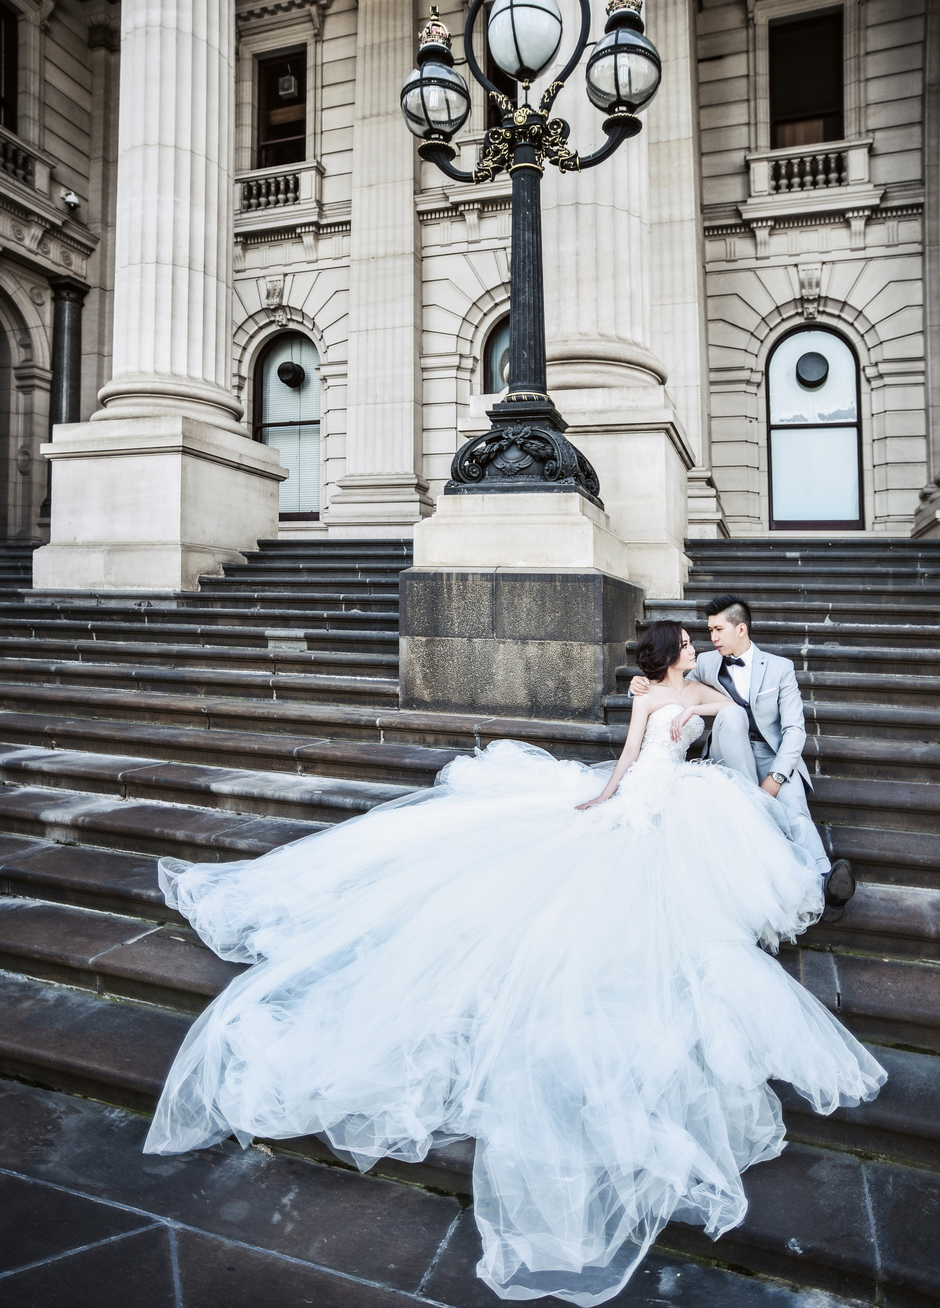 Tulle forever and ever! Beautiful wedding photo overflowing with regal romance!